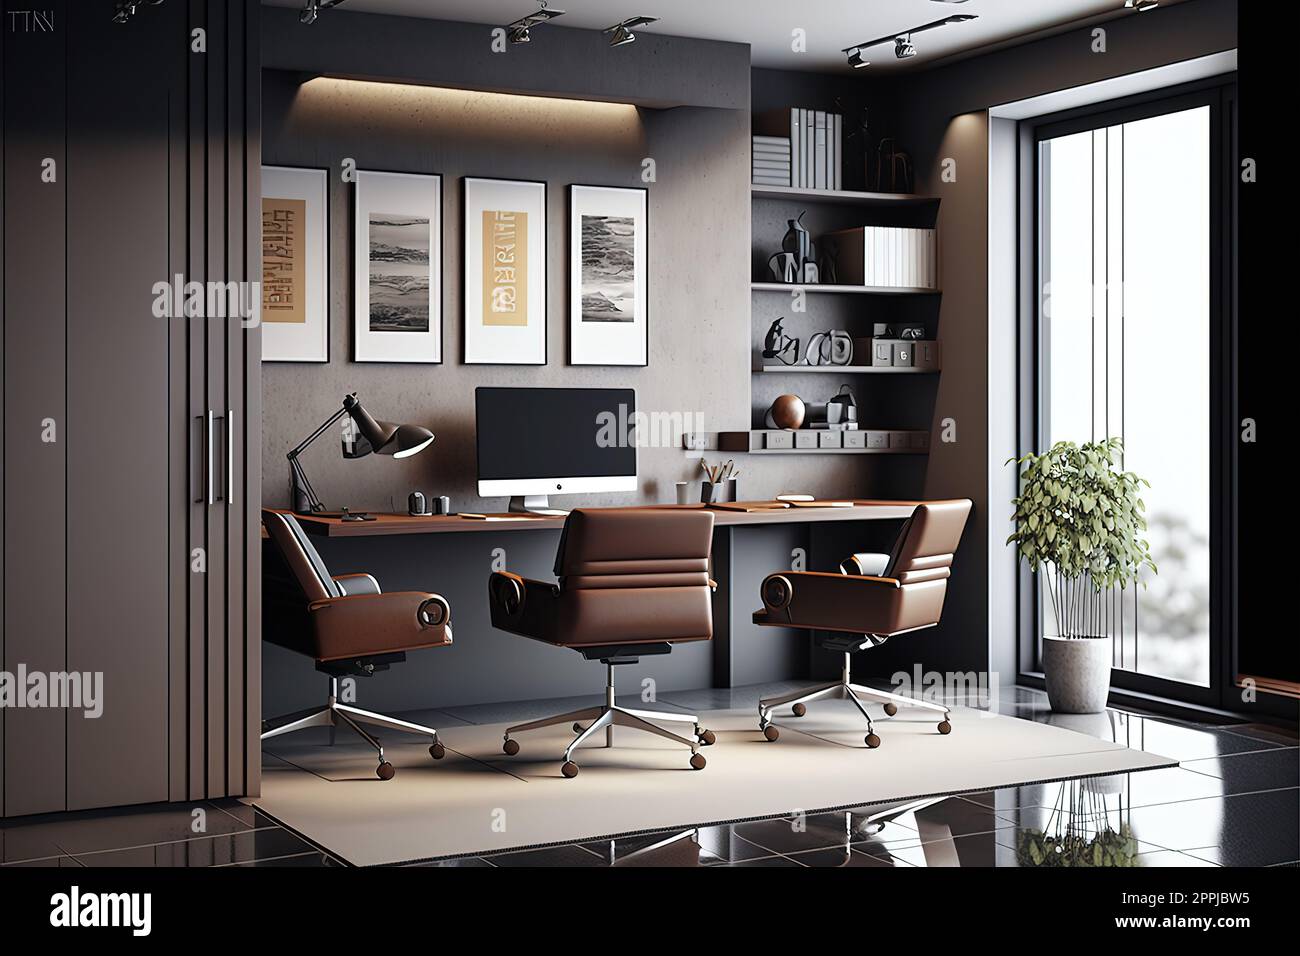 https://c8.alamy.com/comp/2PPJBW5/corner-of-grey-and-brown-office-interior-with-desk-stylish-niche-cabinets-panoramic-view-three-rolling-chairs-and-concrete-floor-concept-of-modern-ceo-work-place-design-2PPJBW5.jpg